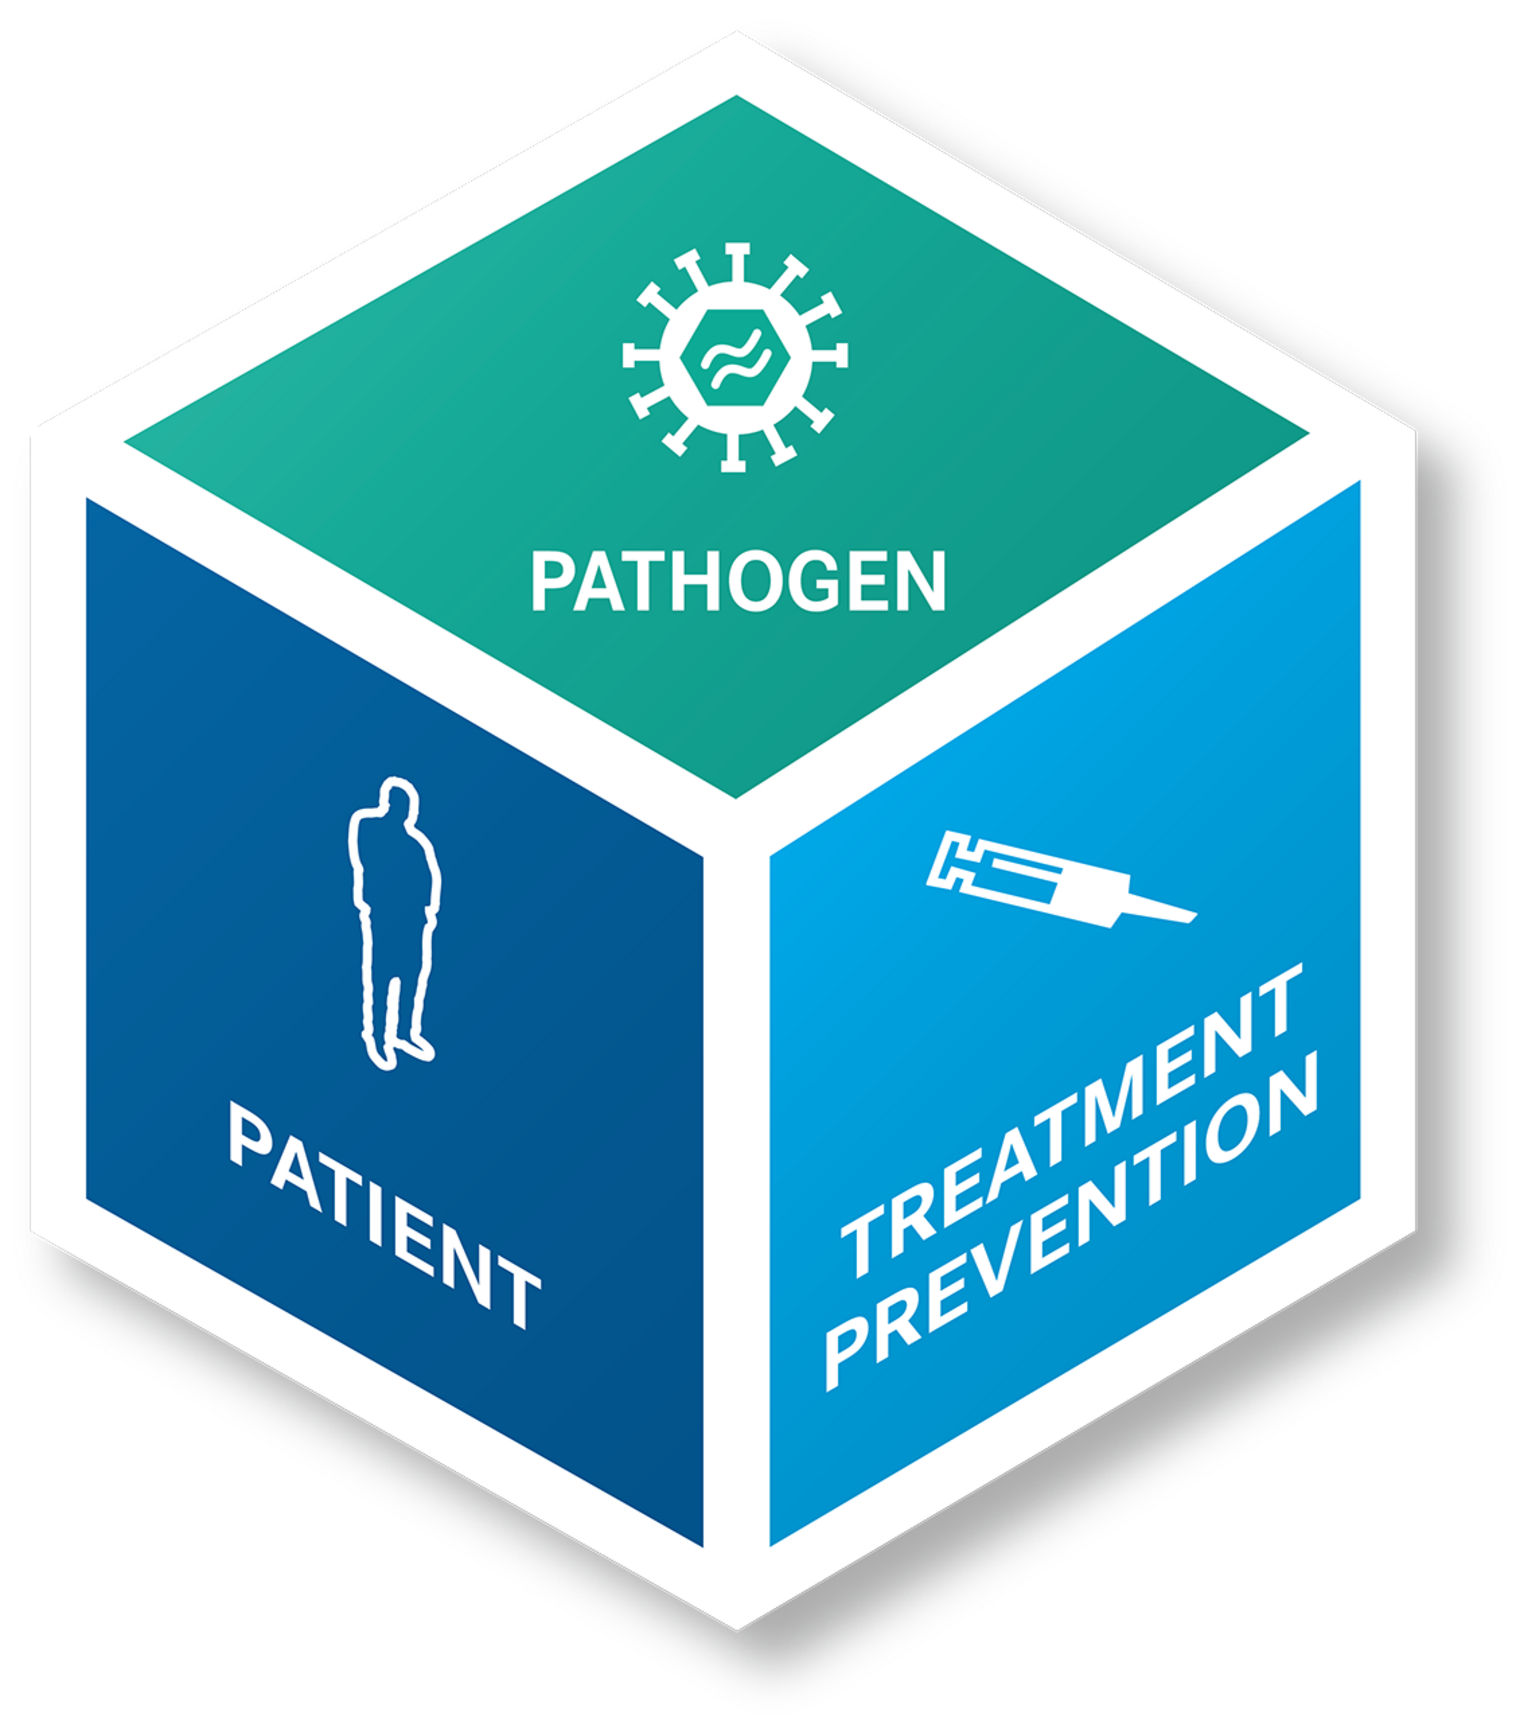 lllustration of the interaction between pathogen and patient.